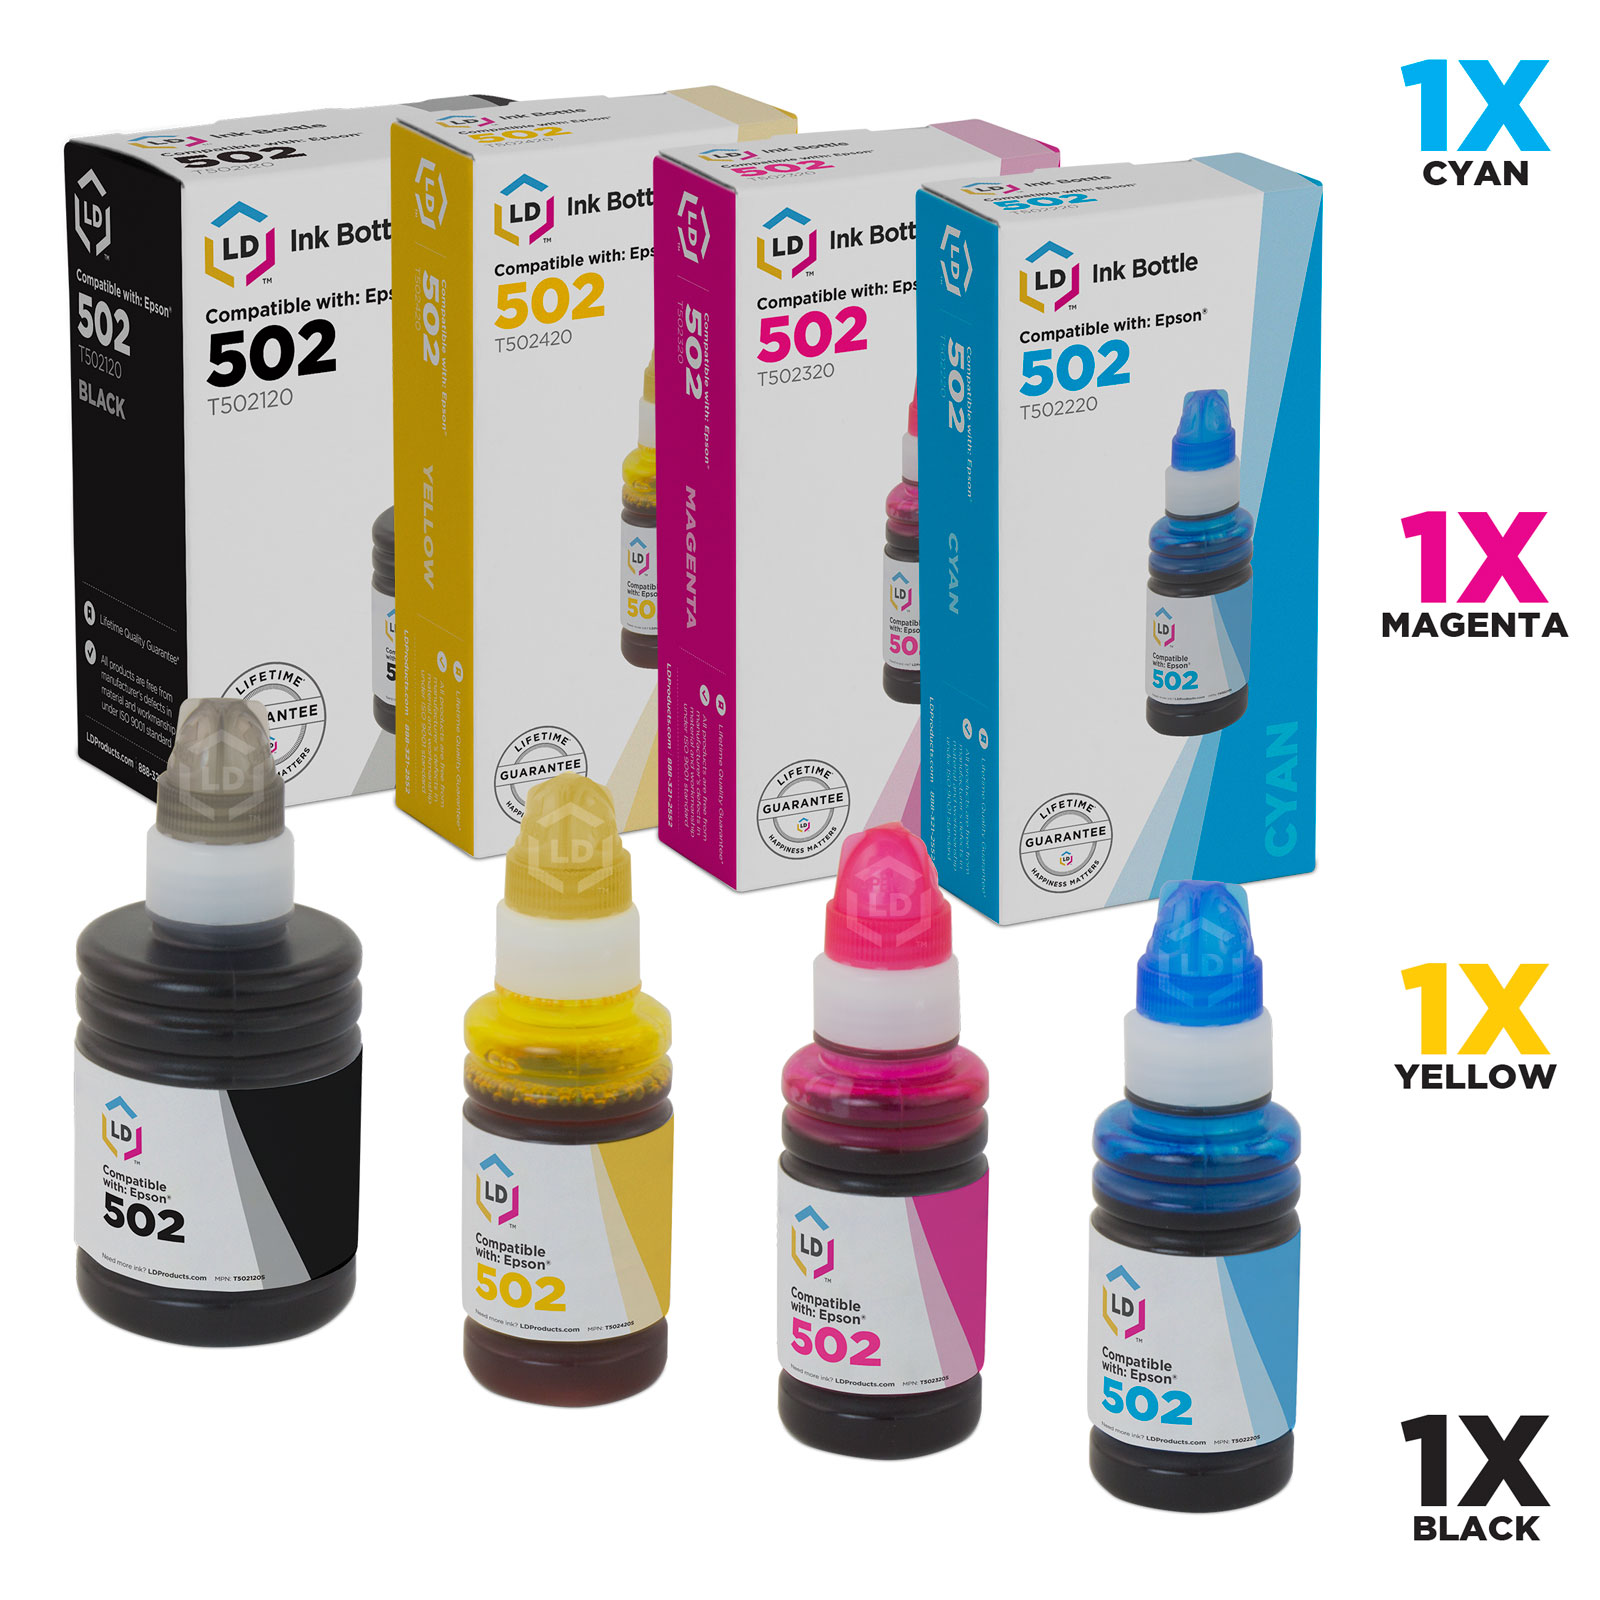 LD Products Compatible Replacements for Epson 502, Set of 4 Ink Bottles - image 1 of 5